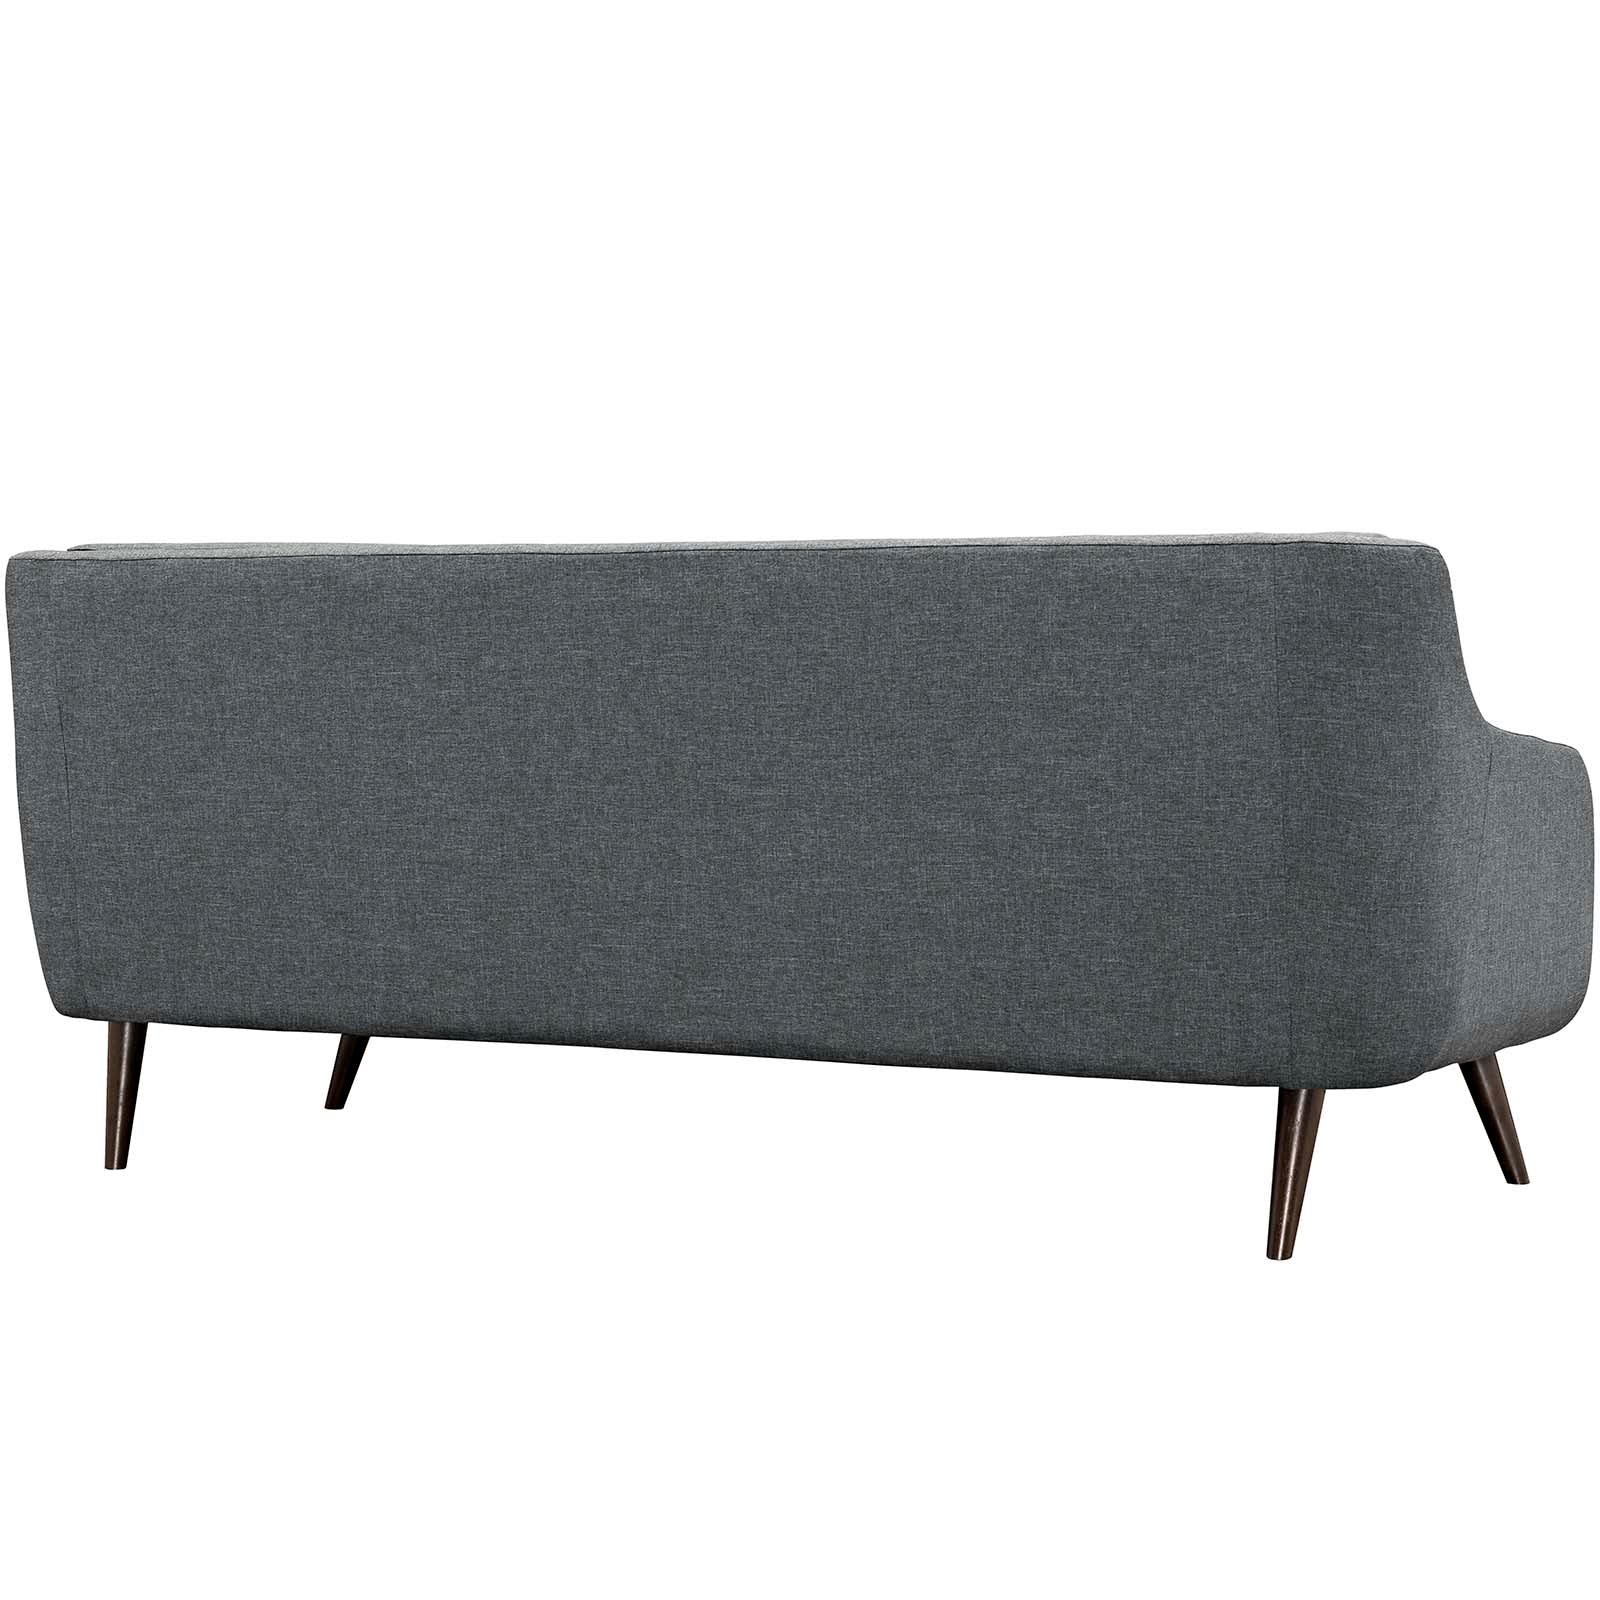 Modway Sofas & Couches - Verve Upholstered Fabric Sofa Gray